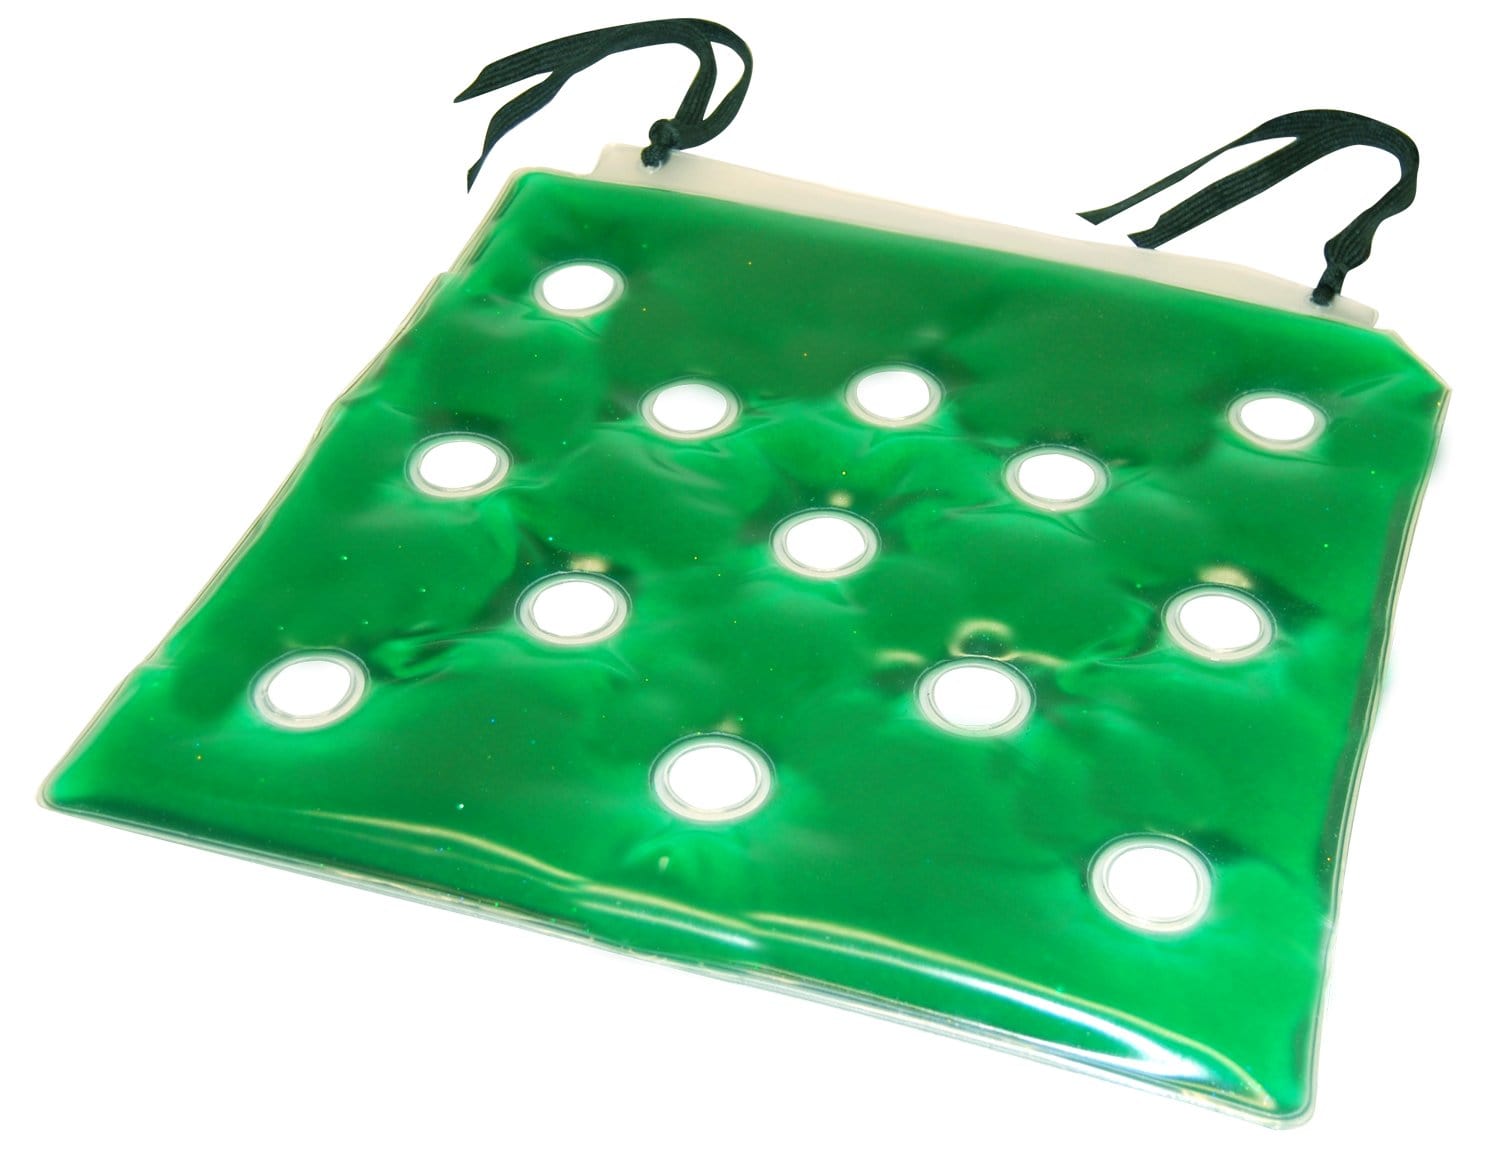 SkilCare Cushions SkilCare Gel-Lift 16" Cushion w/Safety Ties - Green